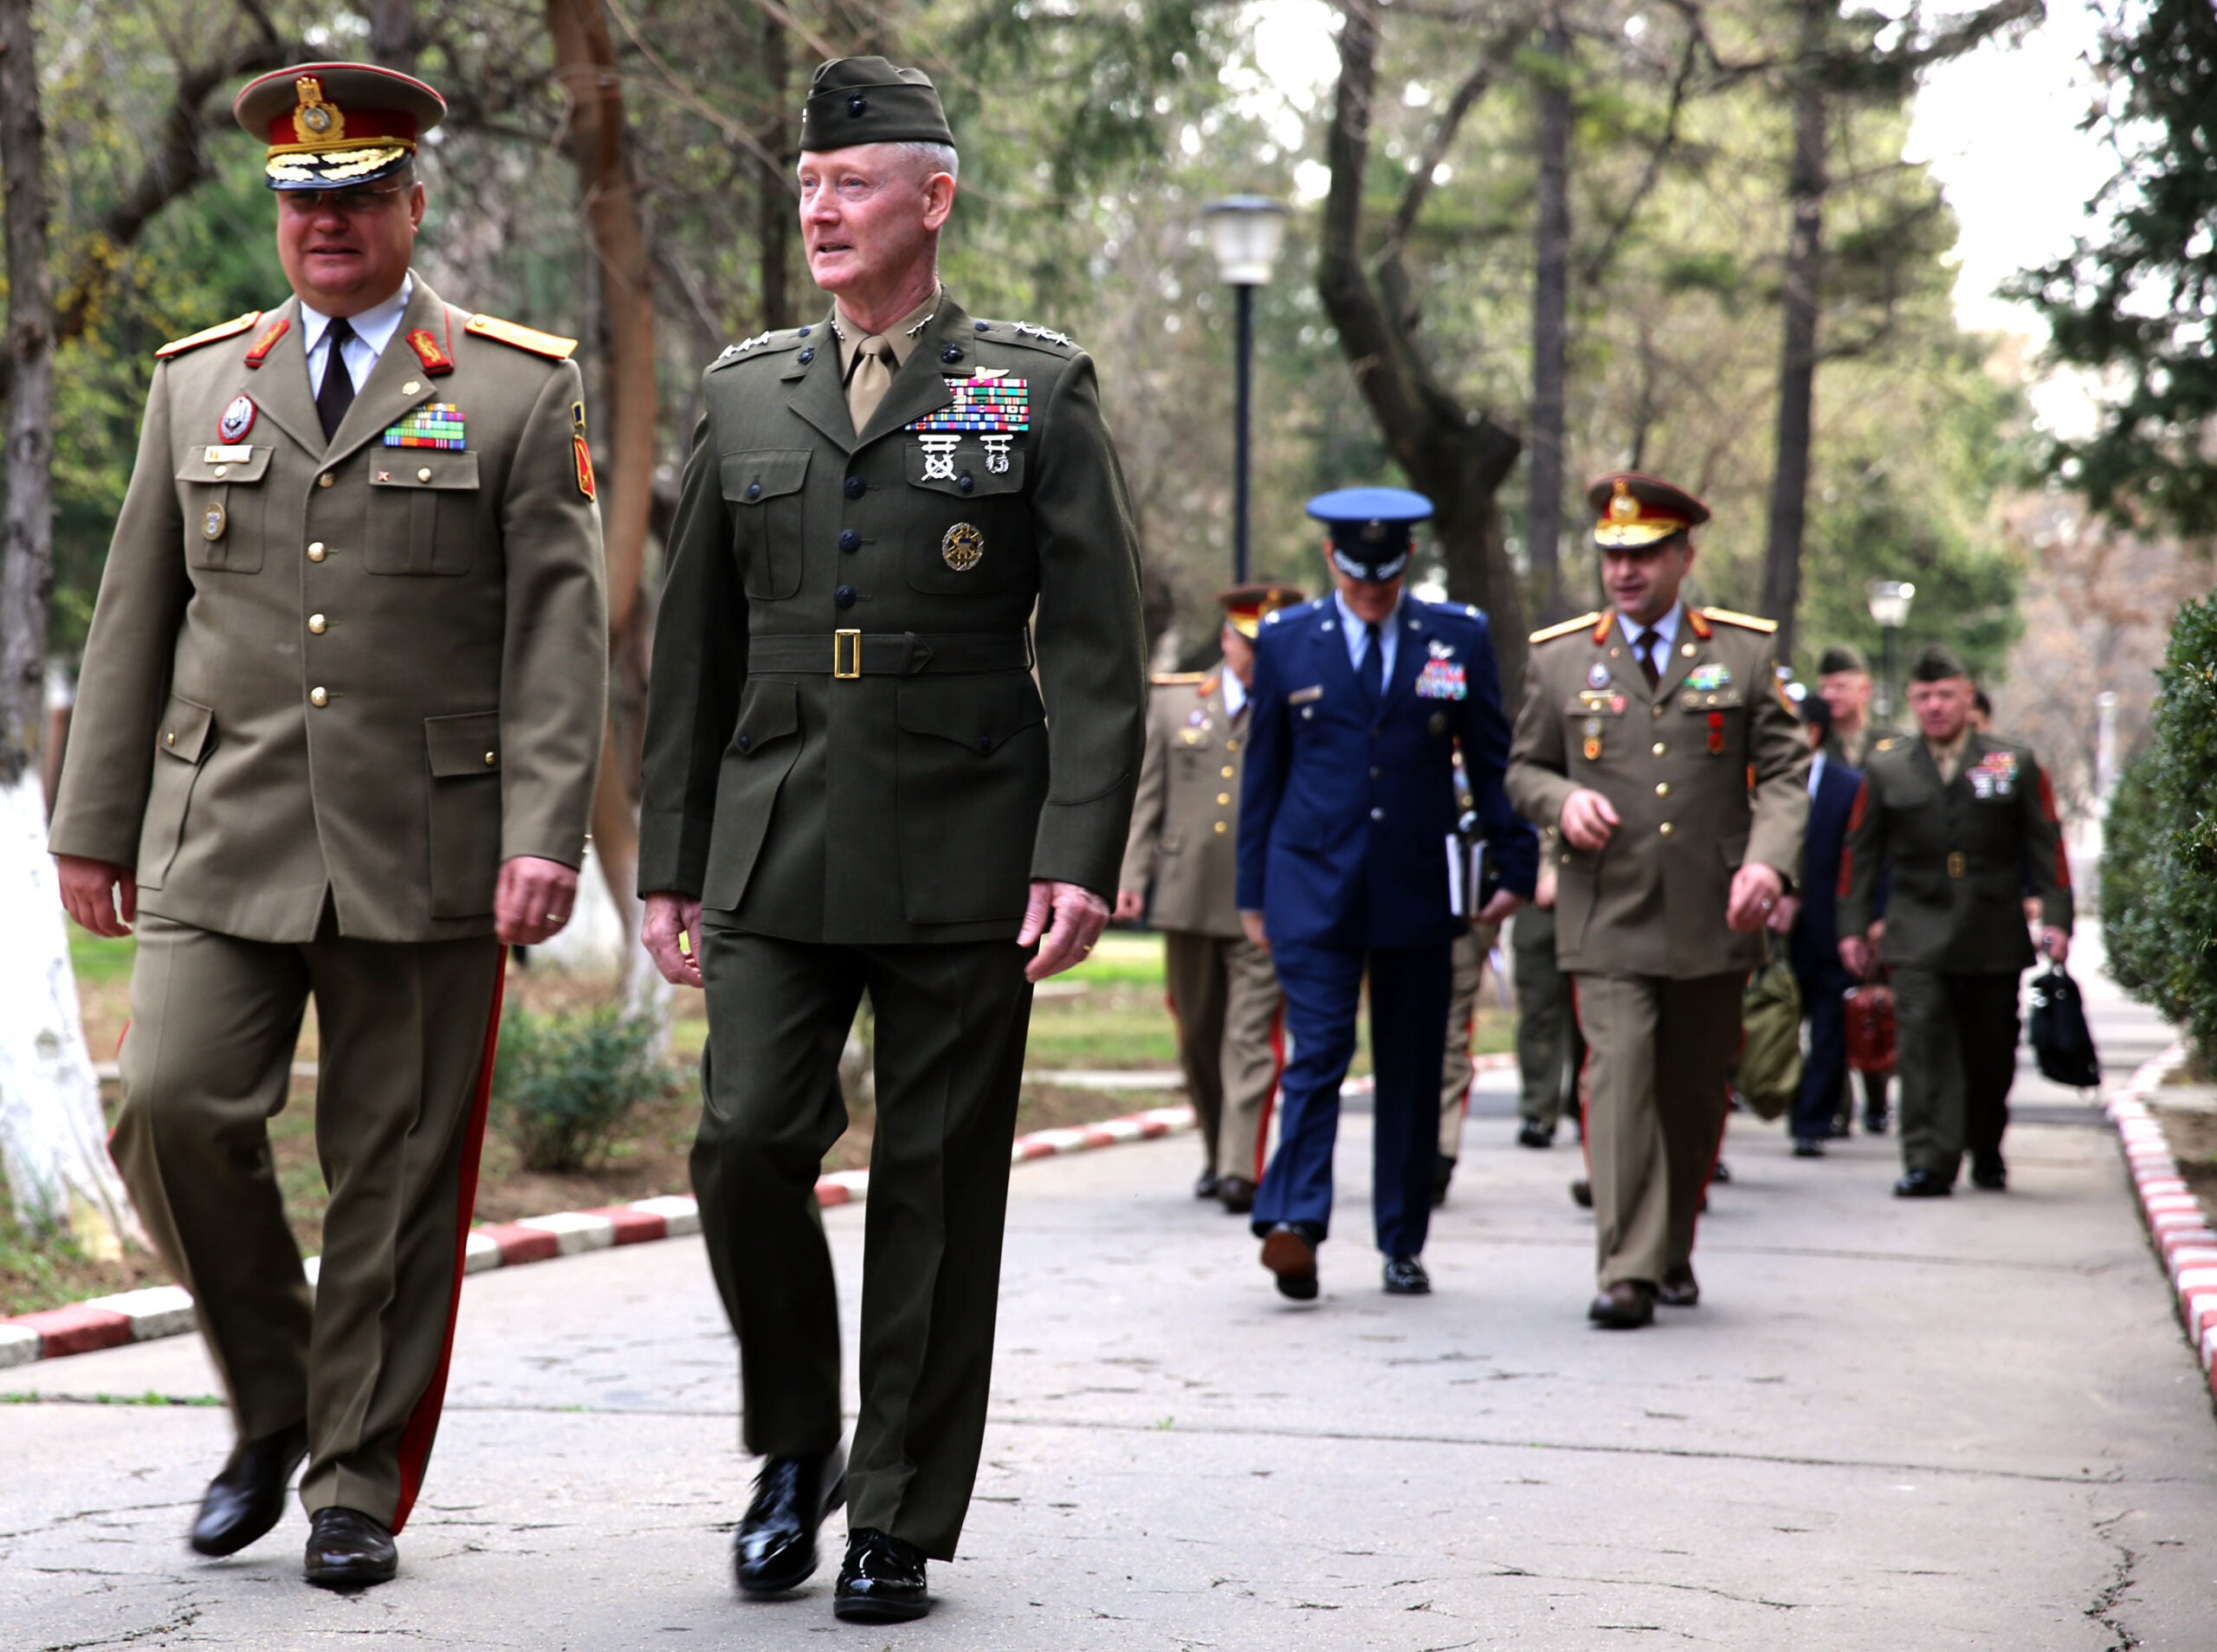 United States Marine Corps Lt. Gen. Richard Tryon, commander of U.S. Marine Corps Forces Command and U.S. Marine Corps Forces, Europe, walks with Romanian Maj. Gen. Nicolae-Ionel Ciuca, chief of Romanian land forces, during Tryon's official visit to Bucharest, March 18, 2014. Tryon visited with Romanian military officials to discuss continuing the good military relationship between the United States and Romania. United States military forces are currently in Romania assigned to Mihail Kogalniceanu Air Base and the two nations work together during much of the Black Sea Rotational Force deployment. Black Sea Rotational Force 14 is a contingent of Marines and sailors tasked with maintaining positive relations with partner nations, regional stability and increasing interoperability while providing the capability for rapid crisis response, as directed by U.S. European Command, in the Black Sea, Balkan and Caucasus regions of Eastern Europe. (Official Marine Corps photo by Lance Cpl. Scott W. Whiting, BSRF PAO/ Released)